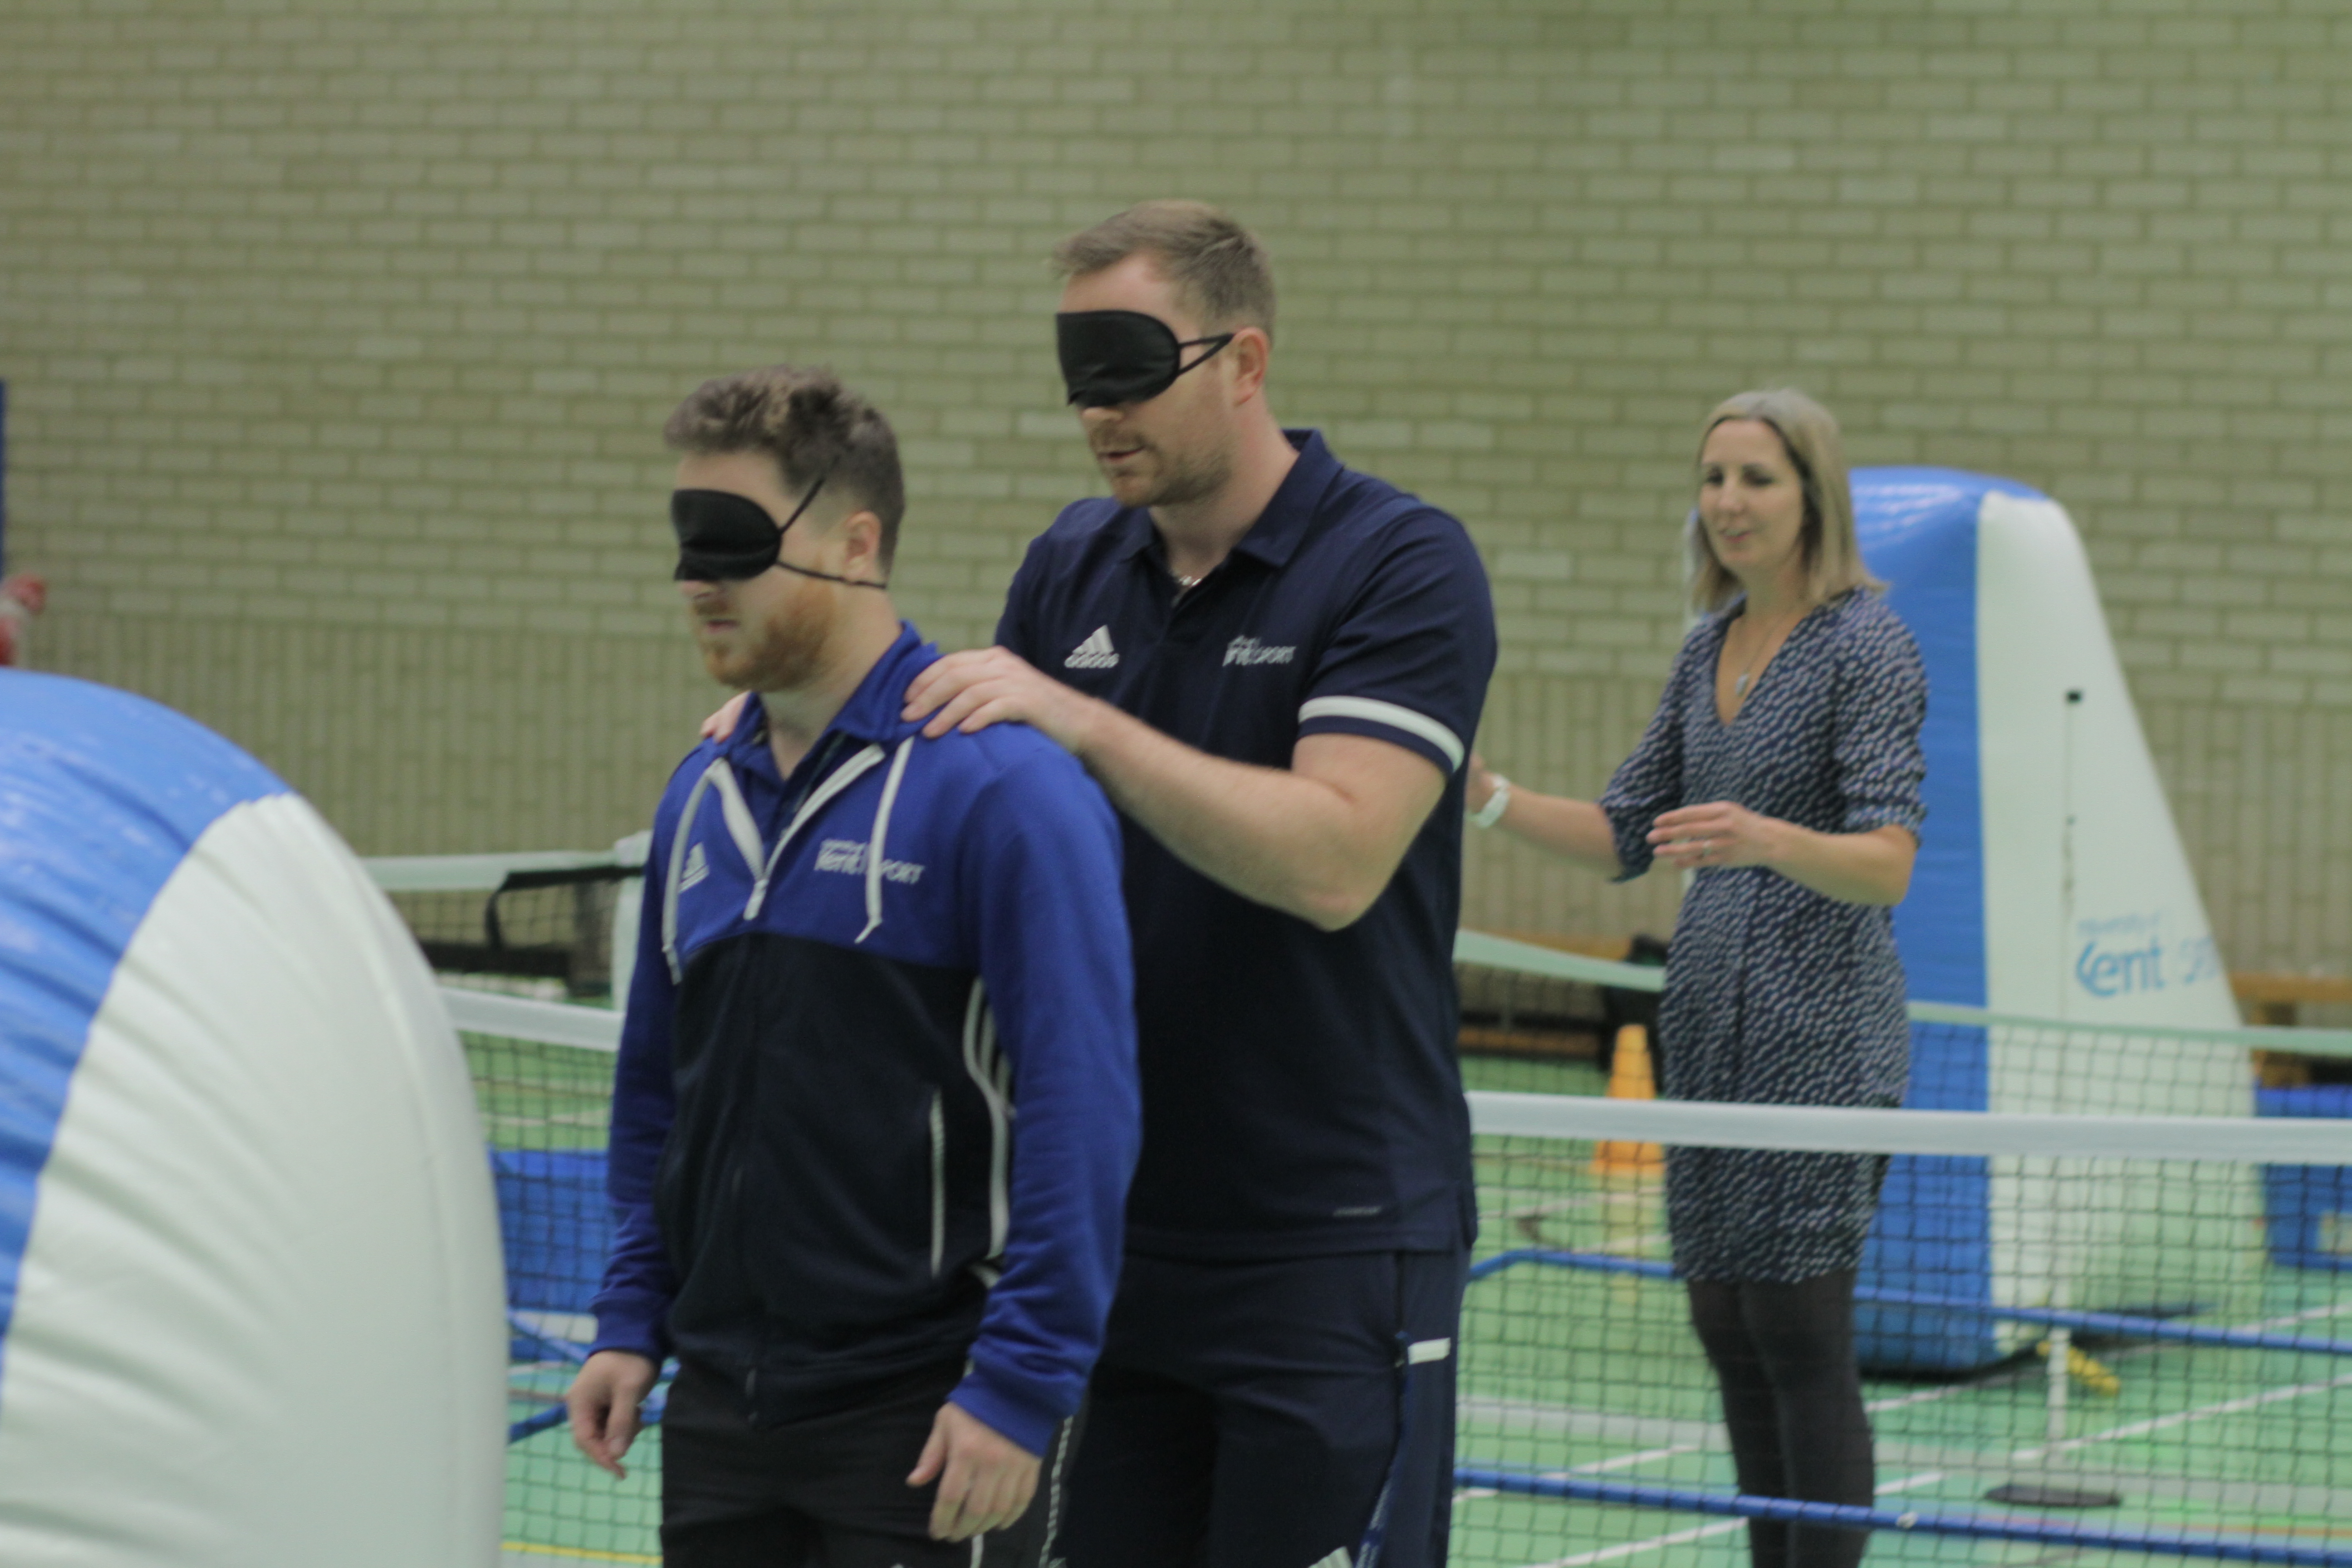 Two staff members stood one in front of the other. The person at the back has his hands rested on his partners shoulders. They are both wearing blindfolds.